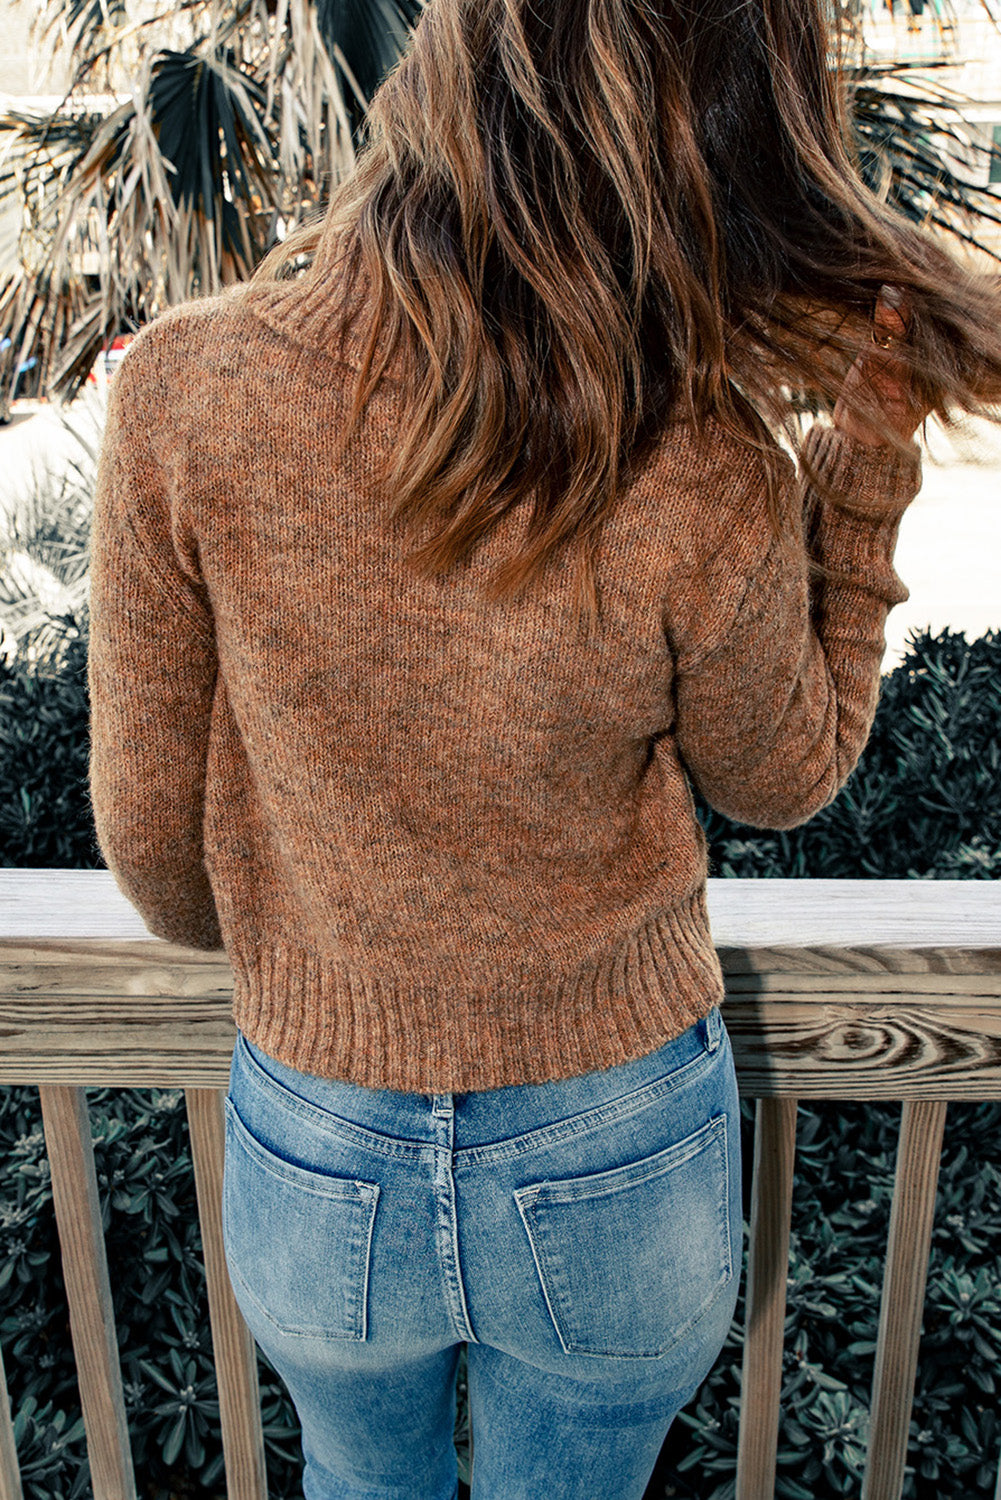 Brown Button Up Collared Rib Knit Cardigan Sweater